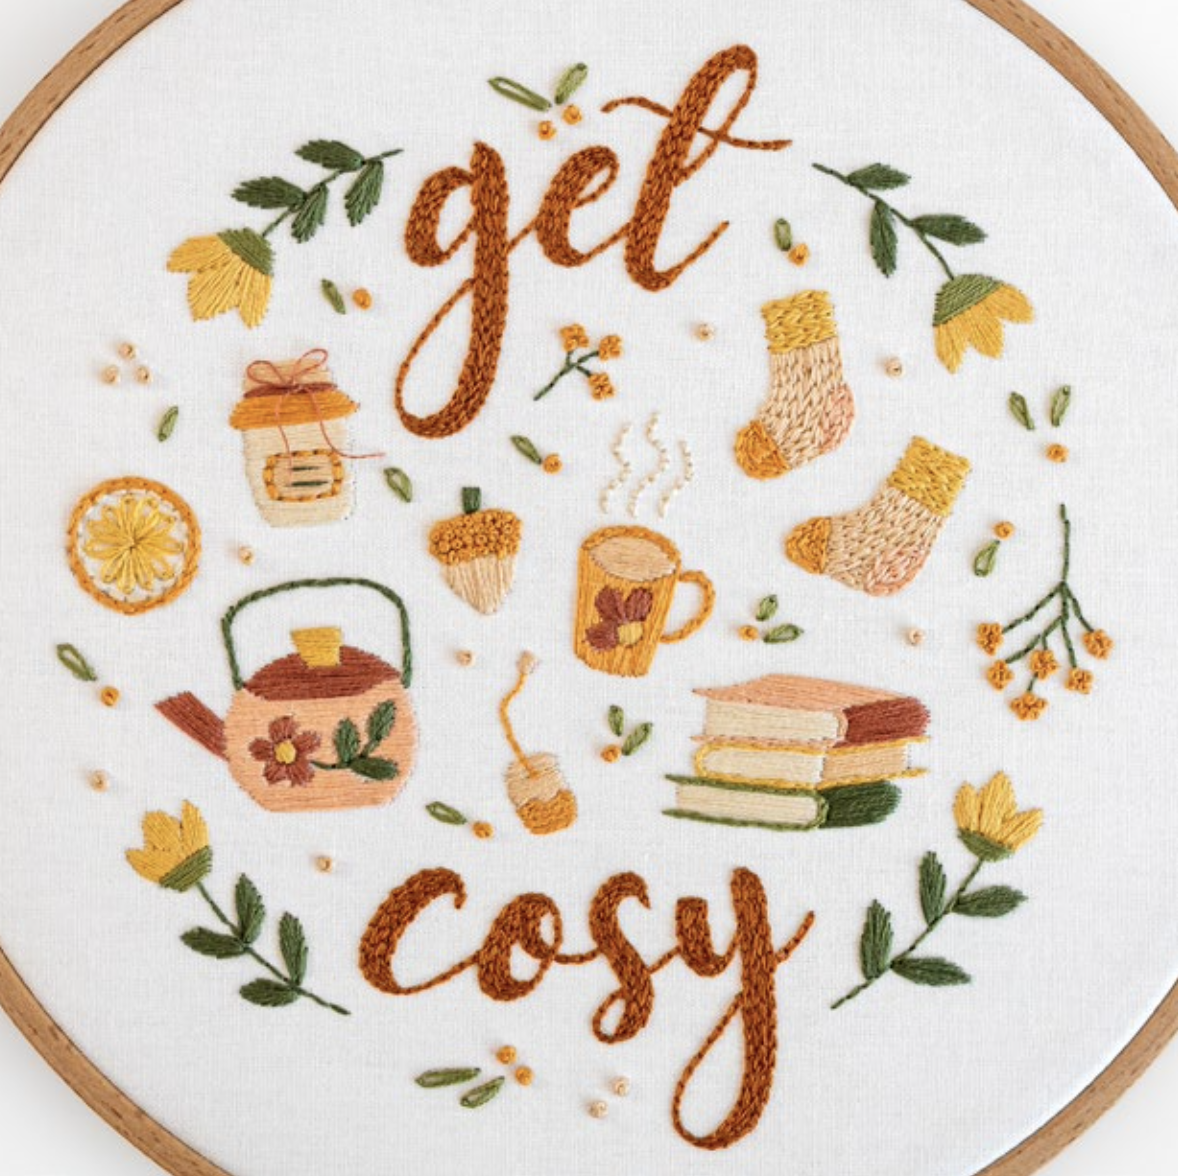 This is an image of the 'Get Cosy' embroidery pattern.